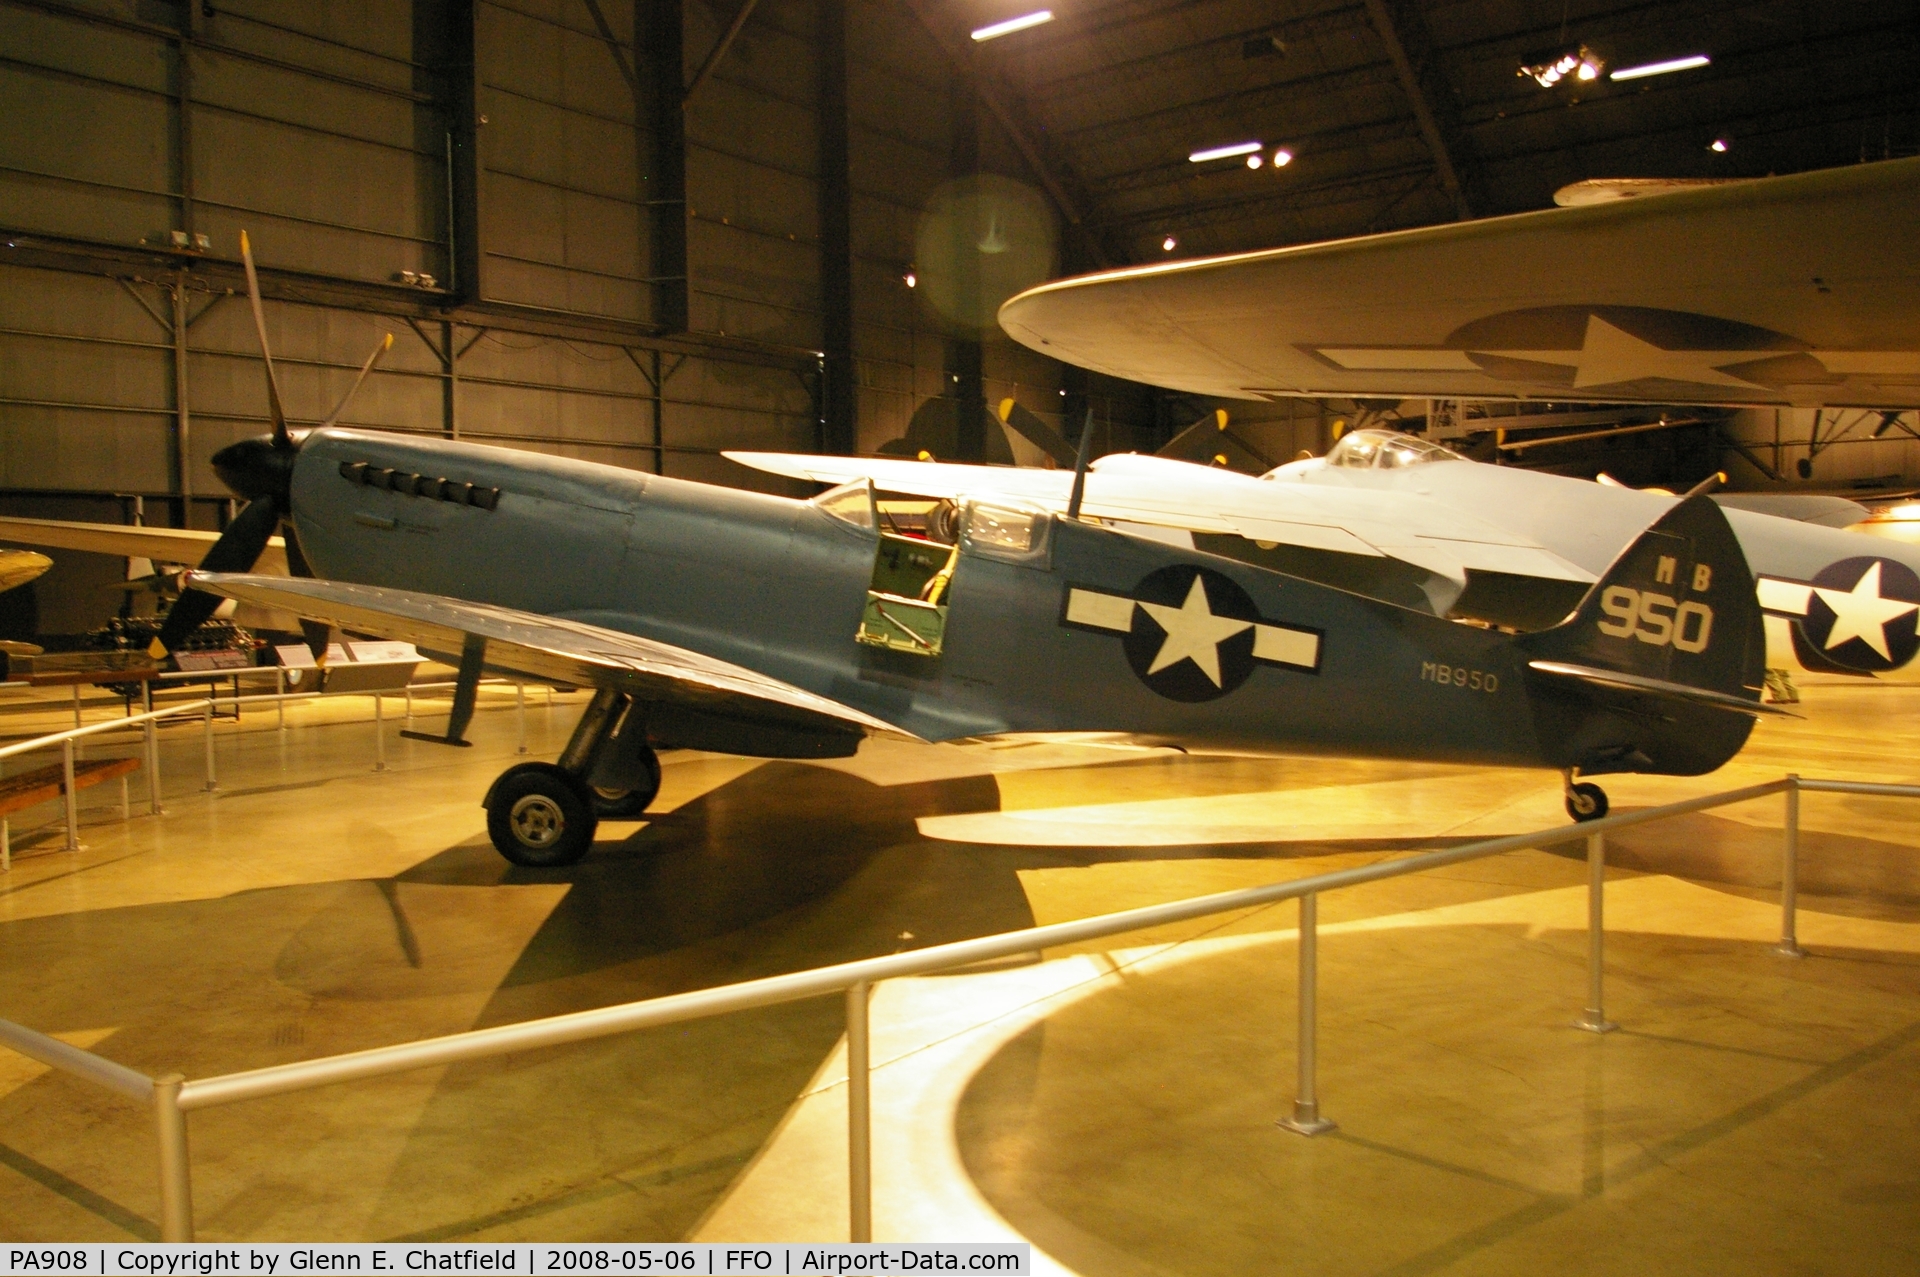 PA908, Supermarine 365 Spitfire PR.XI C/N 6S/417723, Displayed at the National Museum of the U.S. Air Force